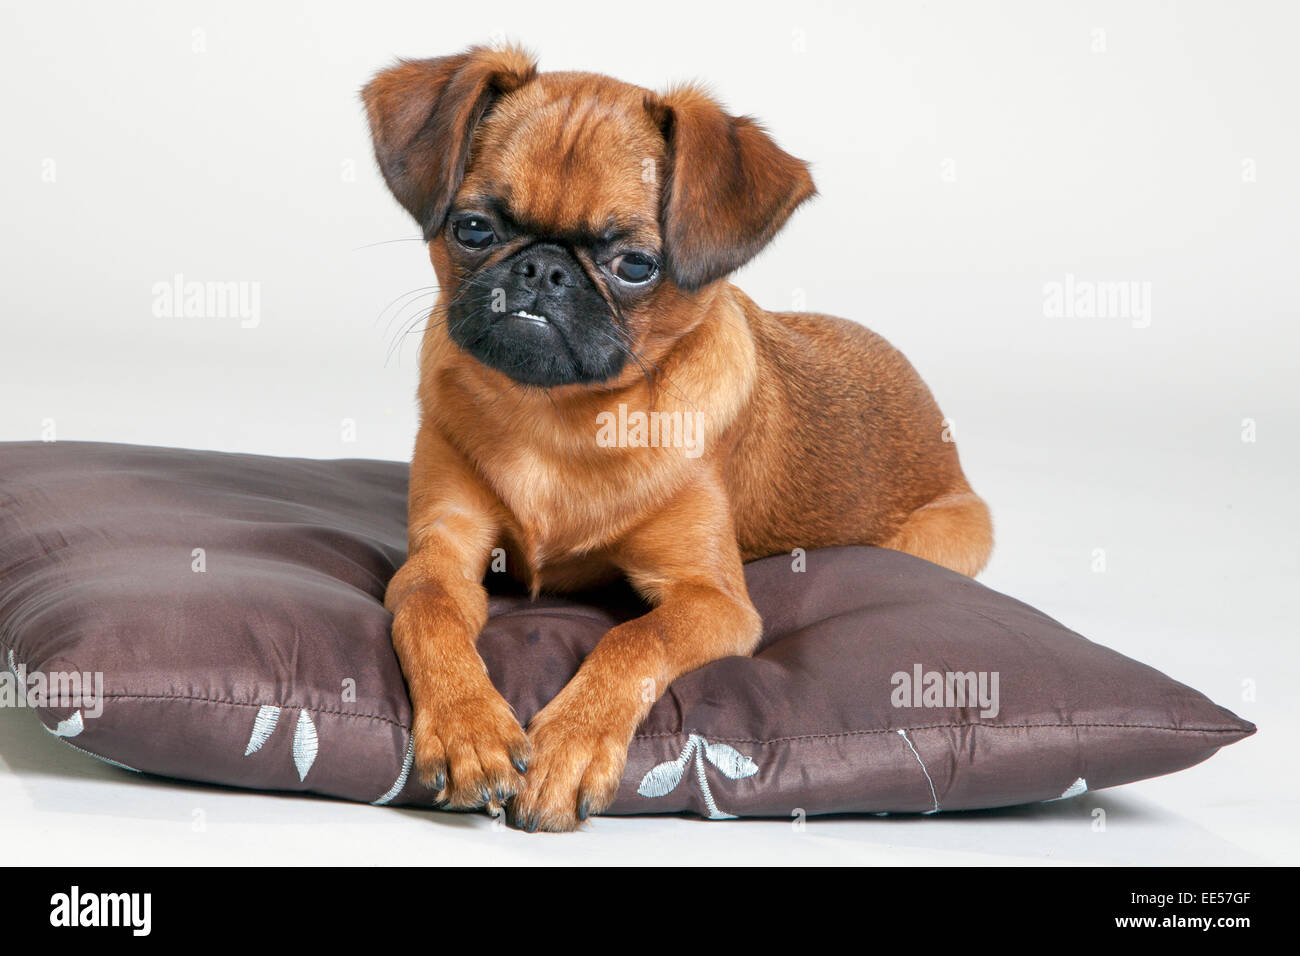 Brussels griffon on brown pillow Stock Photo